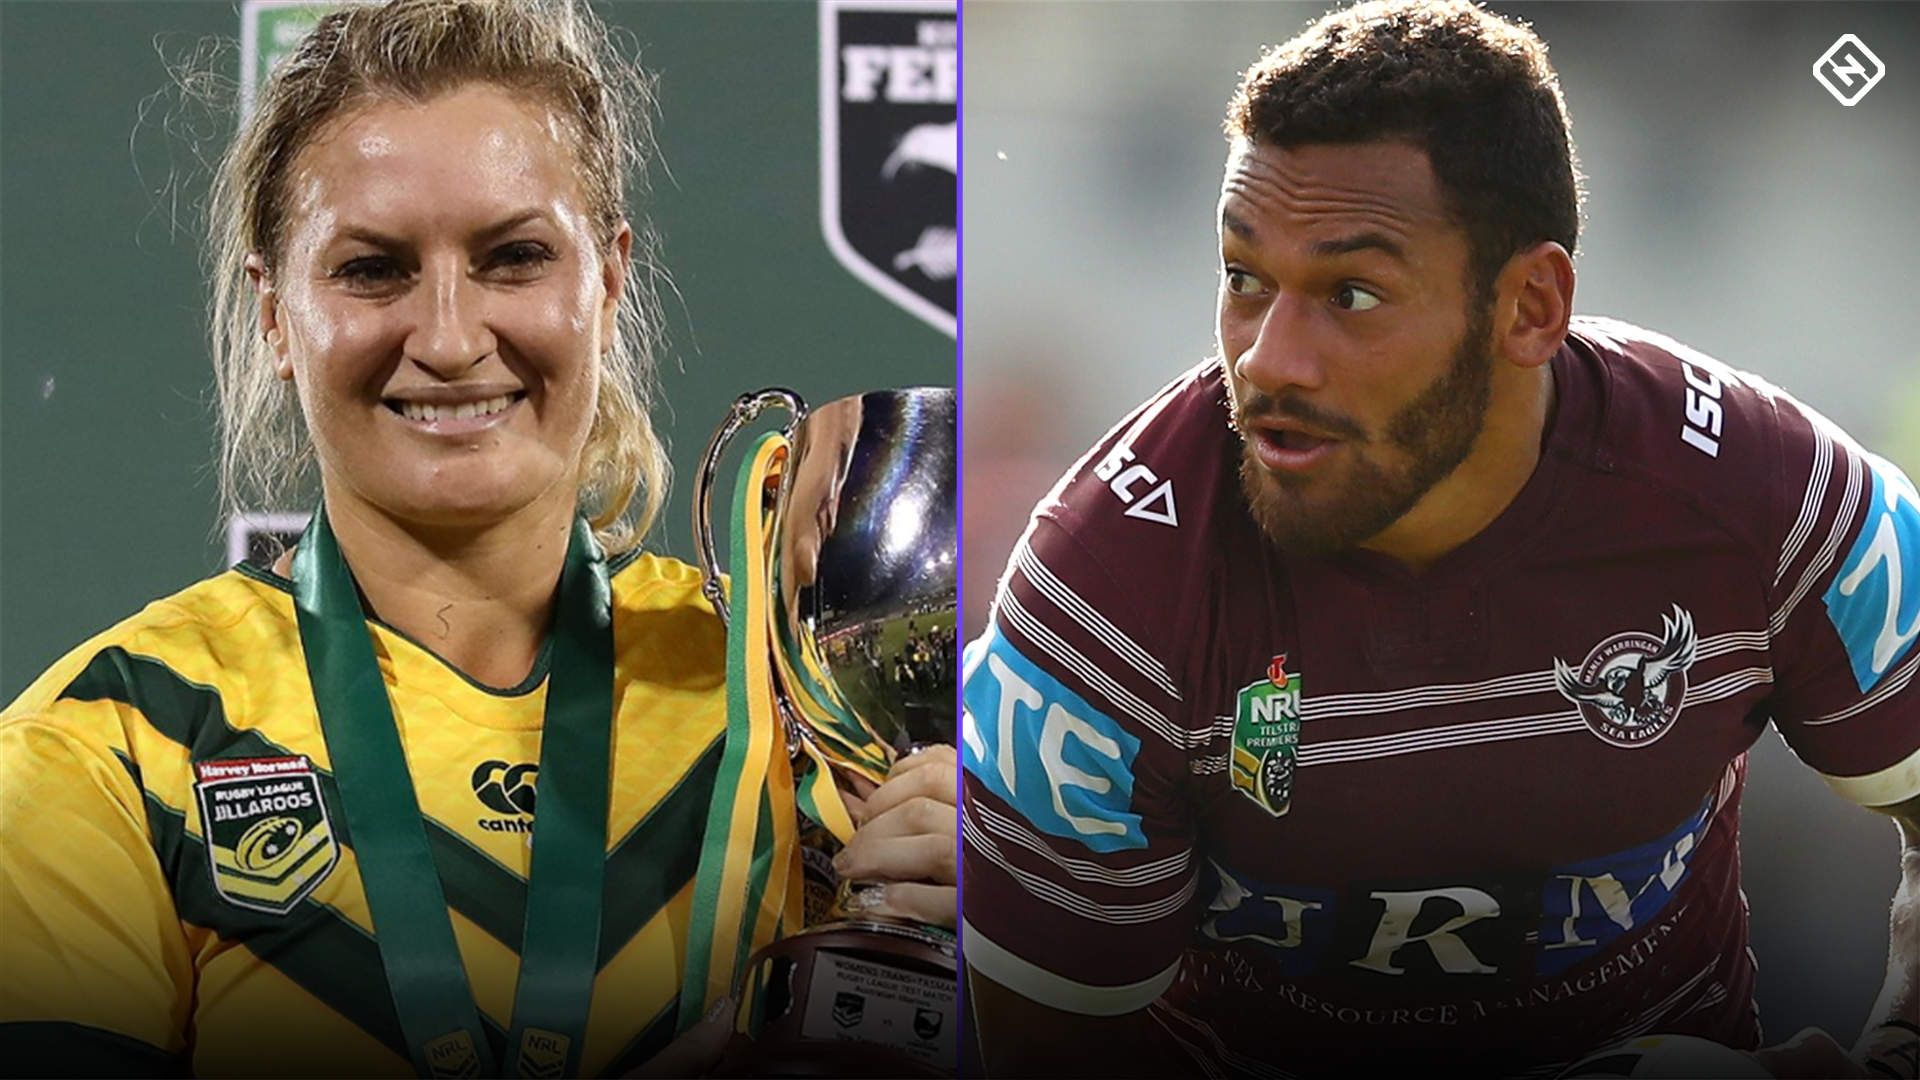 The Repeat Set: Ruan Sims finds an unlikely Dally M ally in Manly's Api Koroisau ...